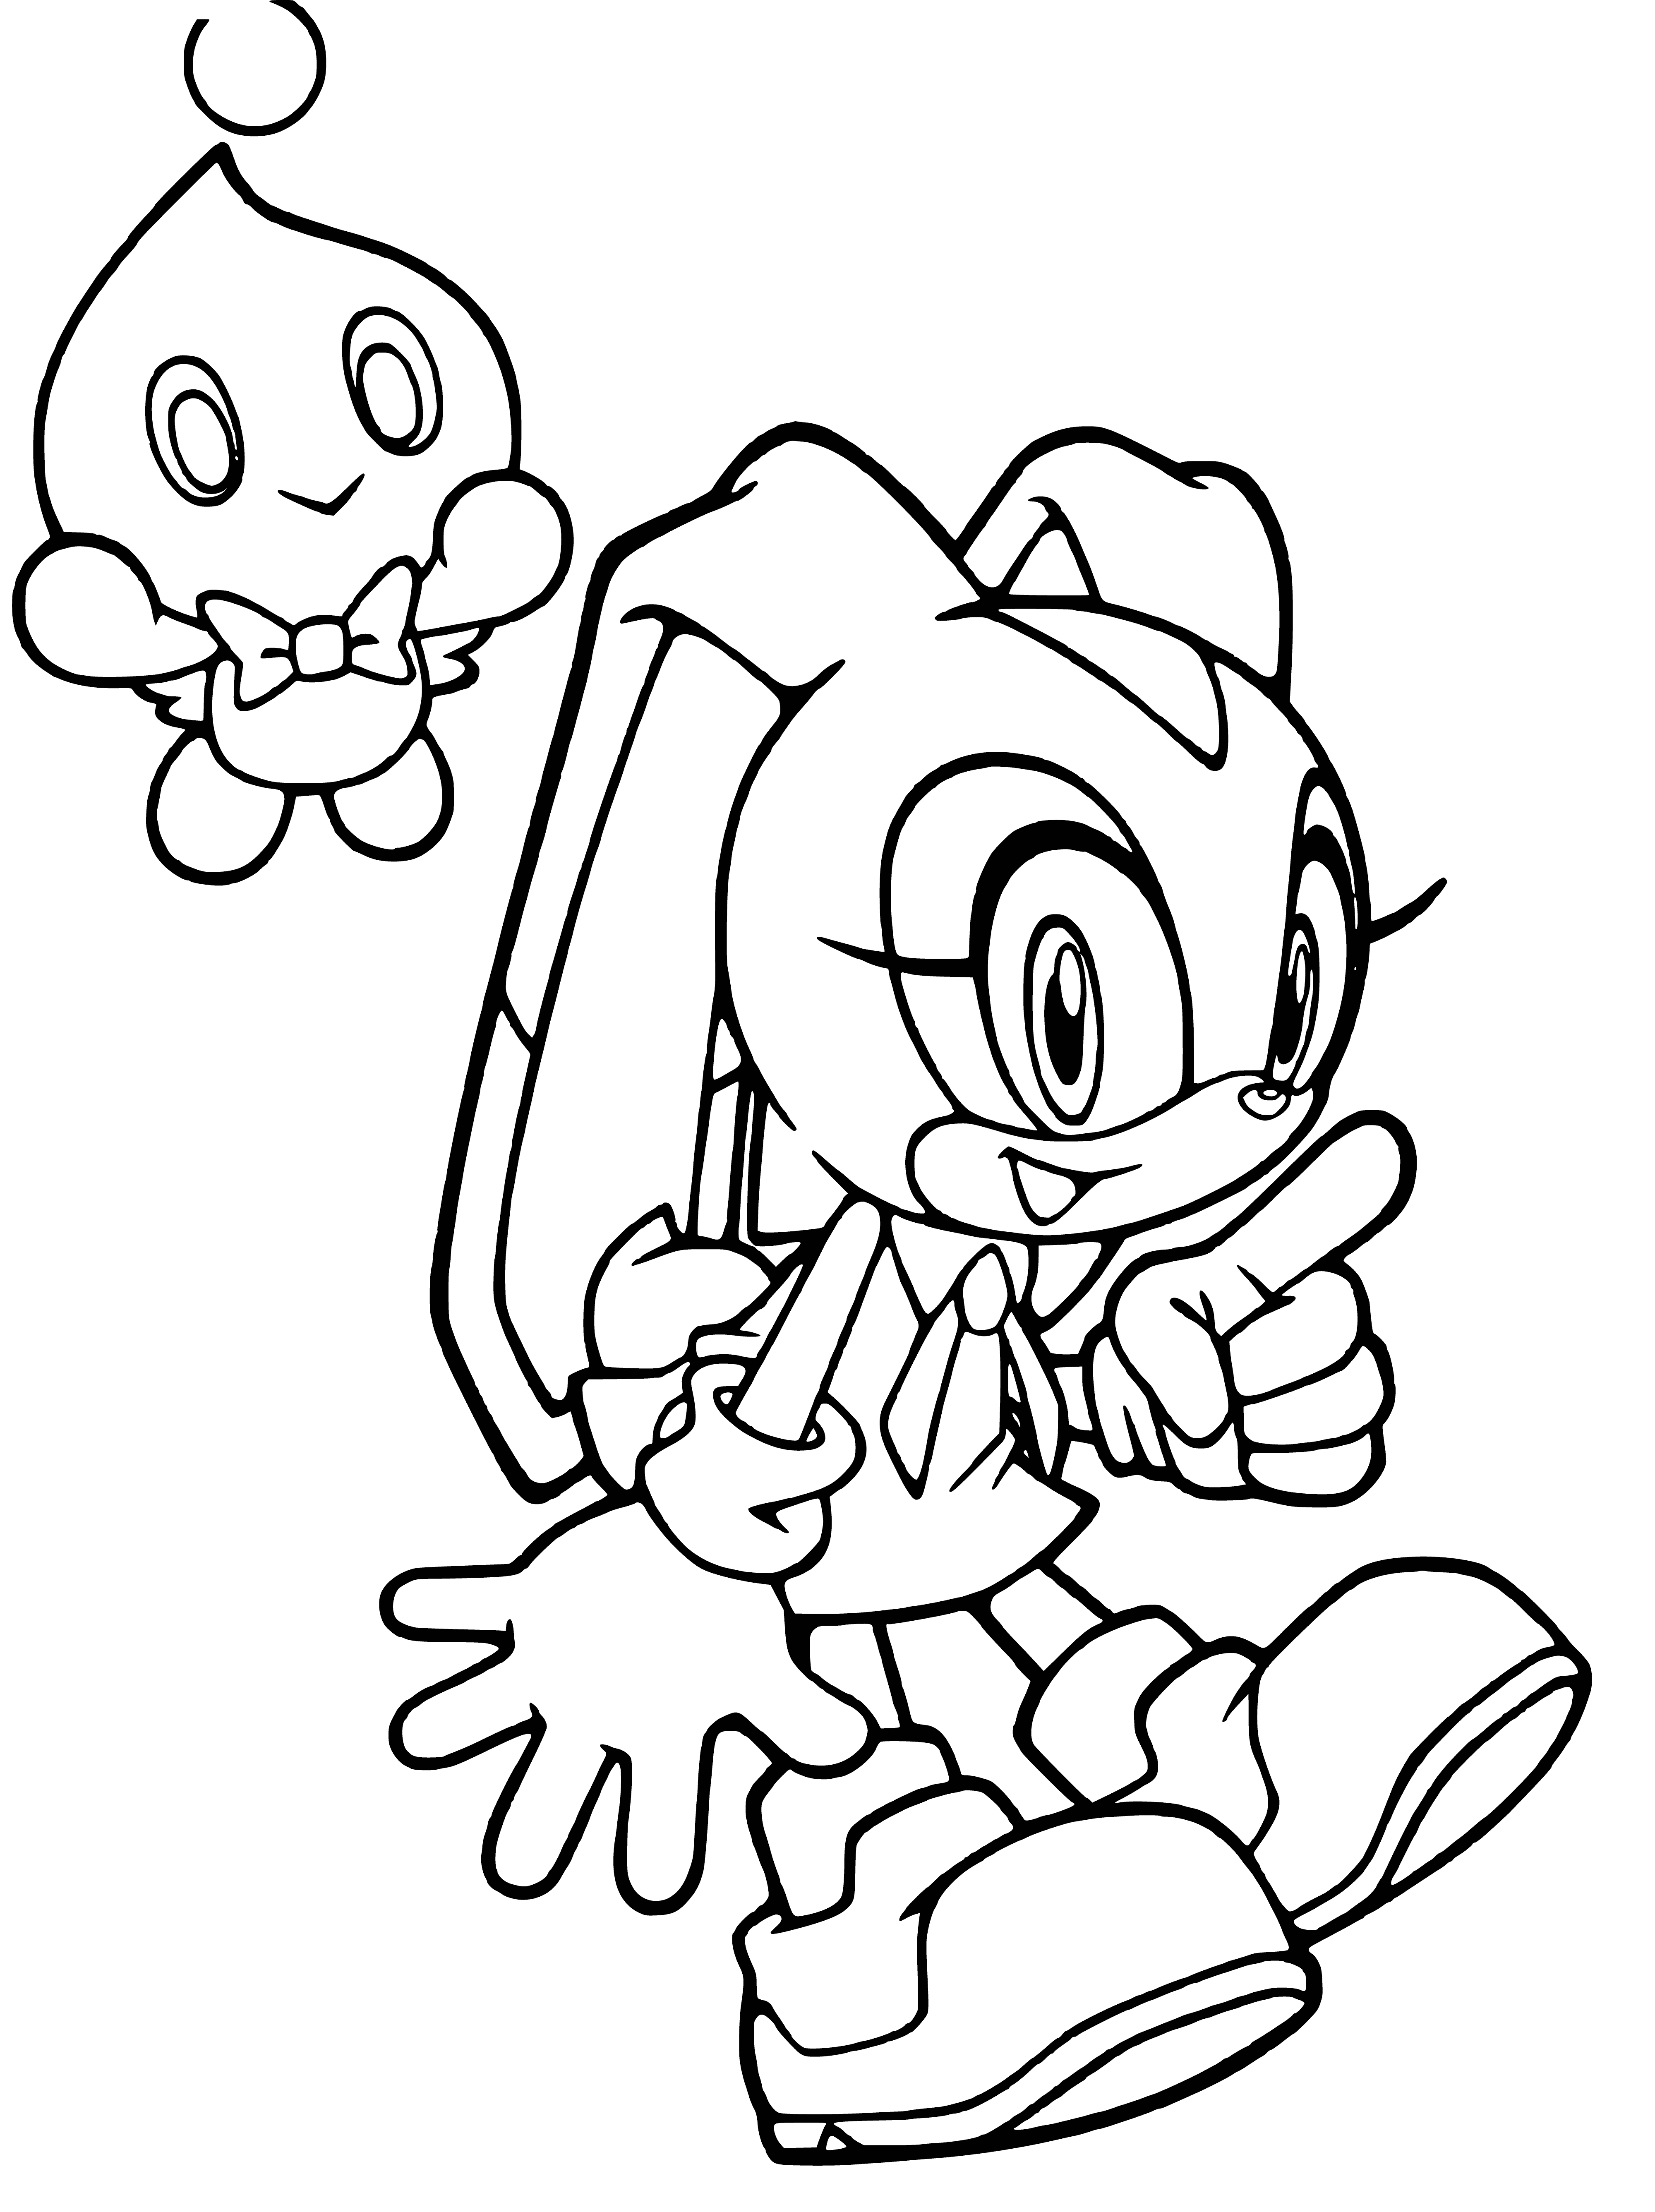 coloring page: A pink rabbit with blue eyes, a blue nose and blue shoes sits in a white chair, clasping its front paws and crossing its back legs. It wears a blue collar with gold ring.